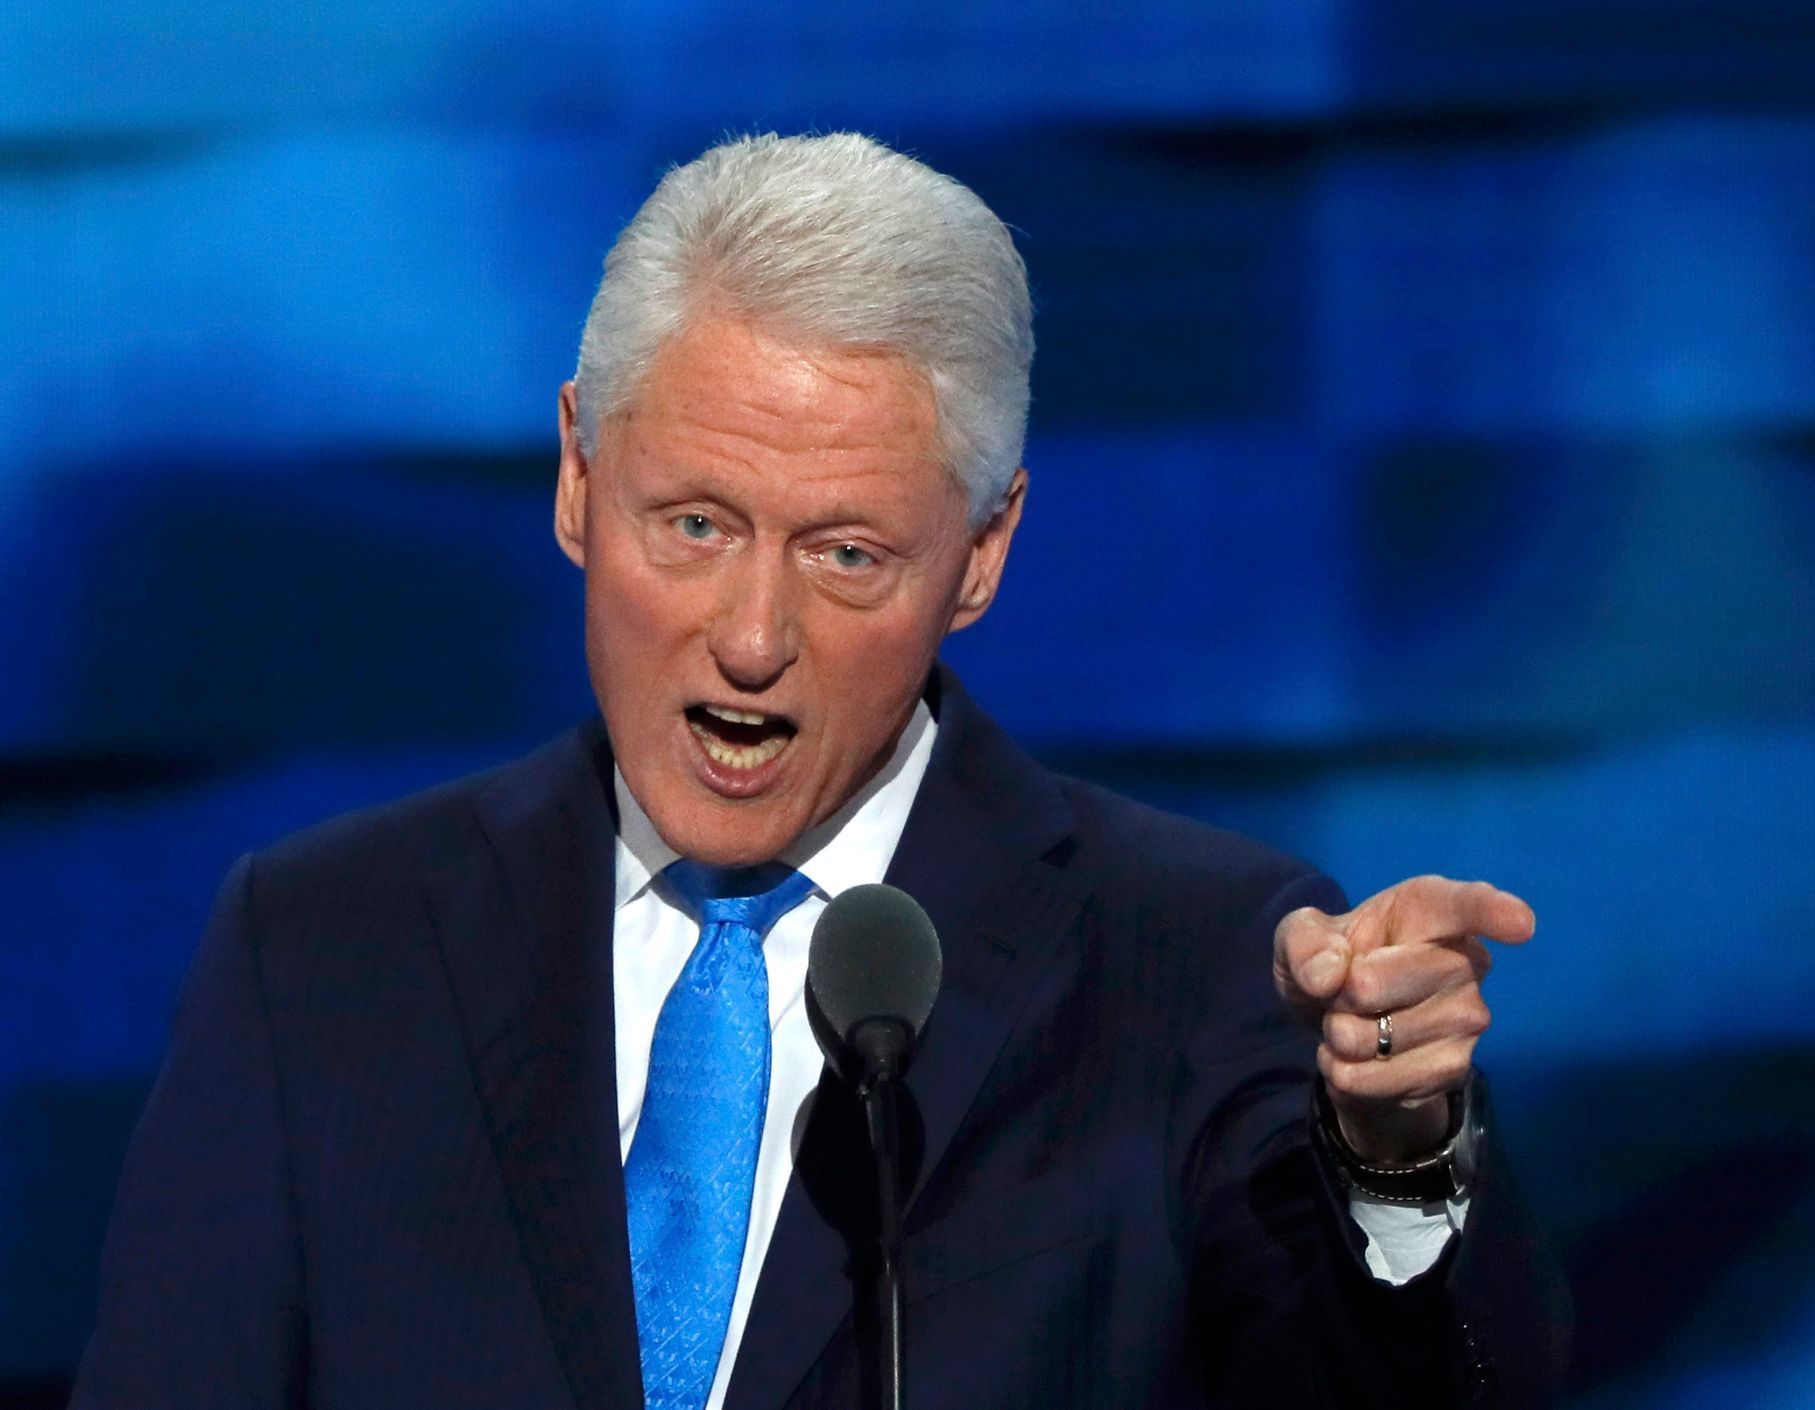 Former U.S. President Bill Clinton speaks during the second night at the Democratic National Convention in Philadelphia